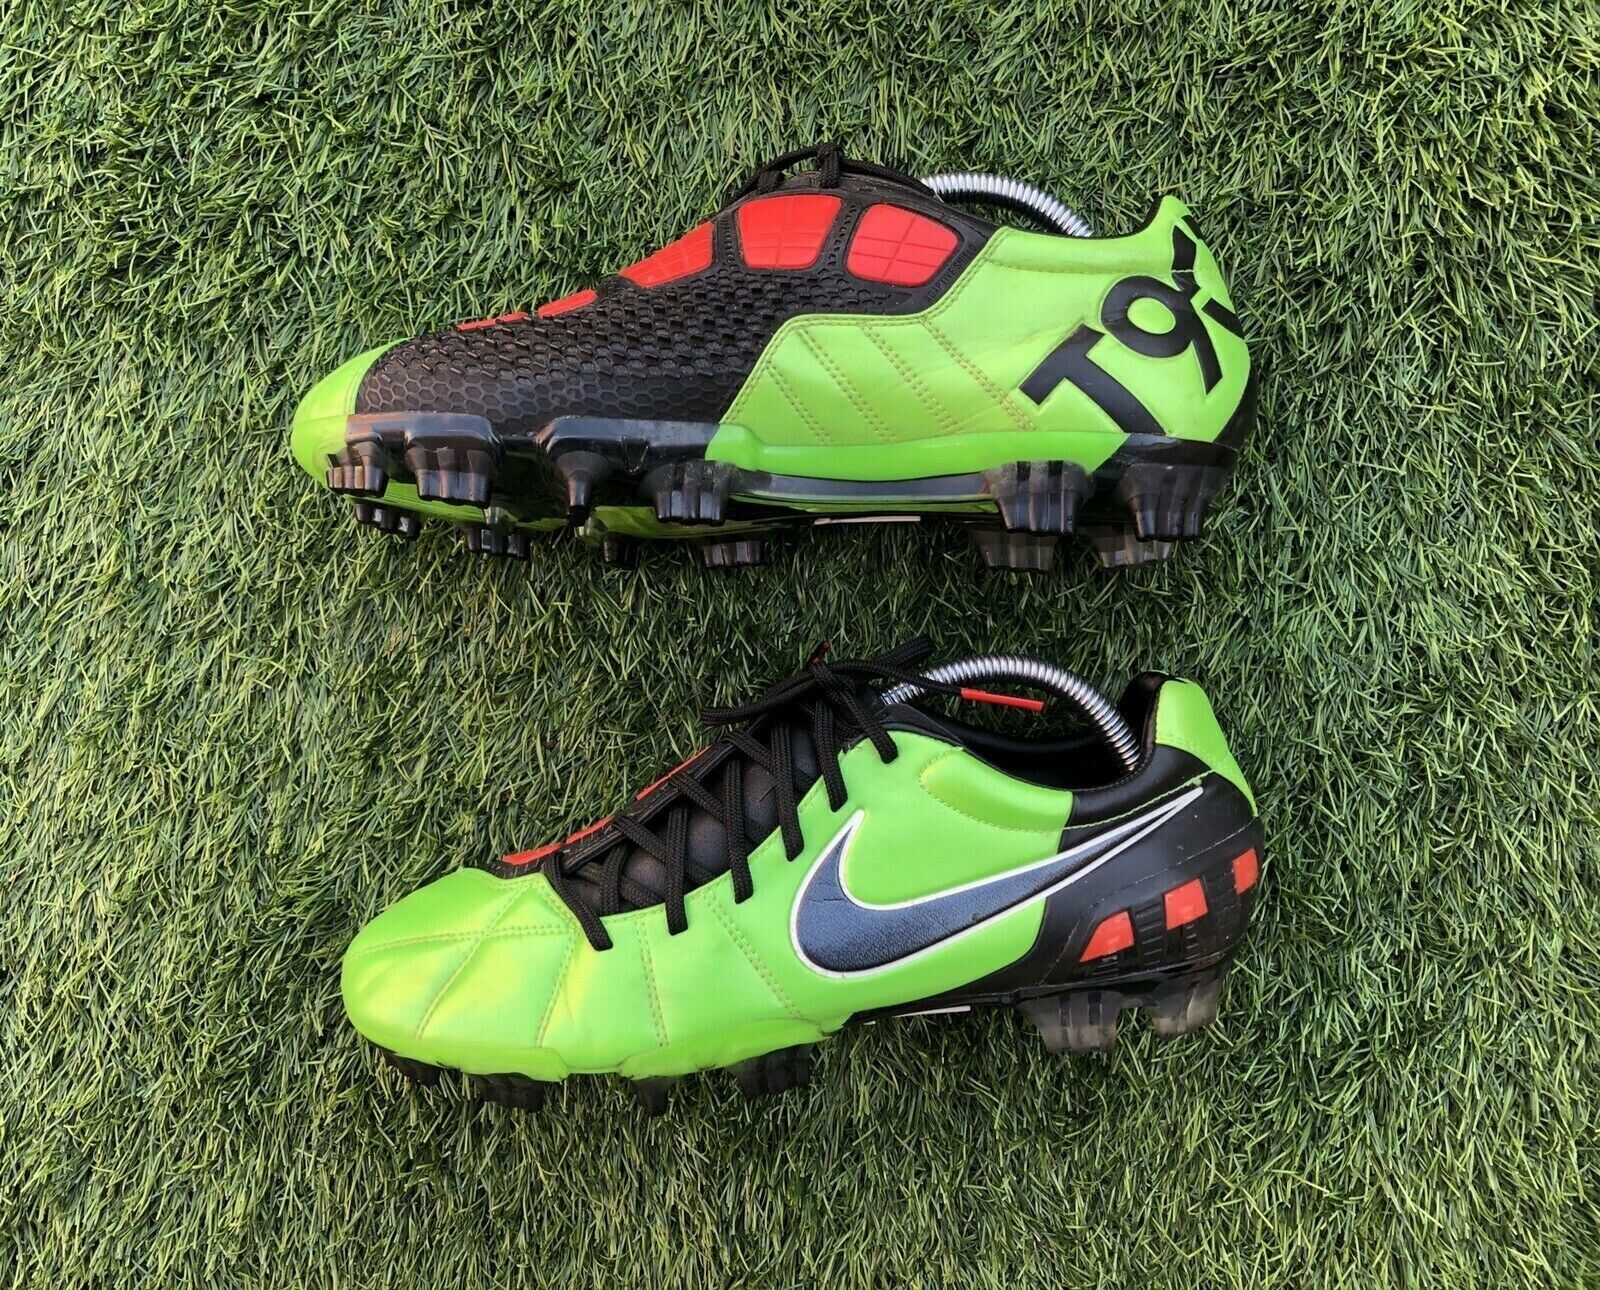 nike 90 soccer boots